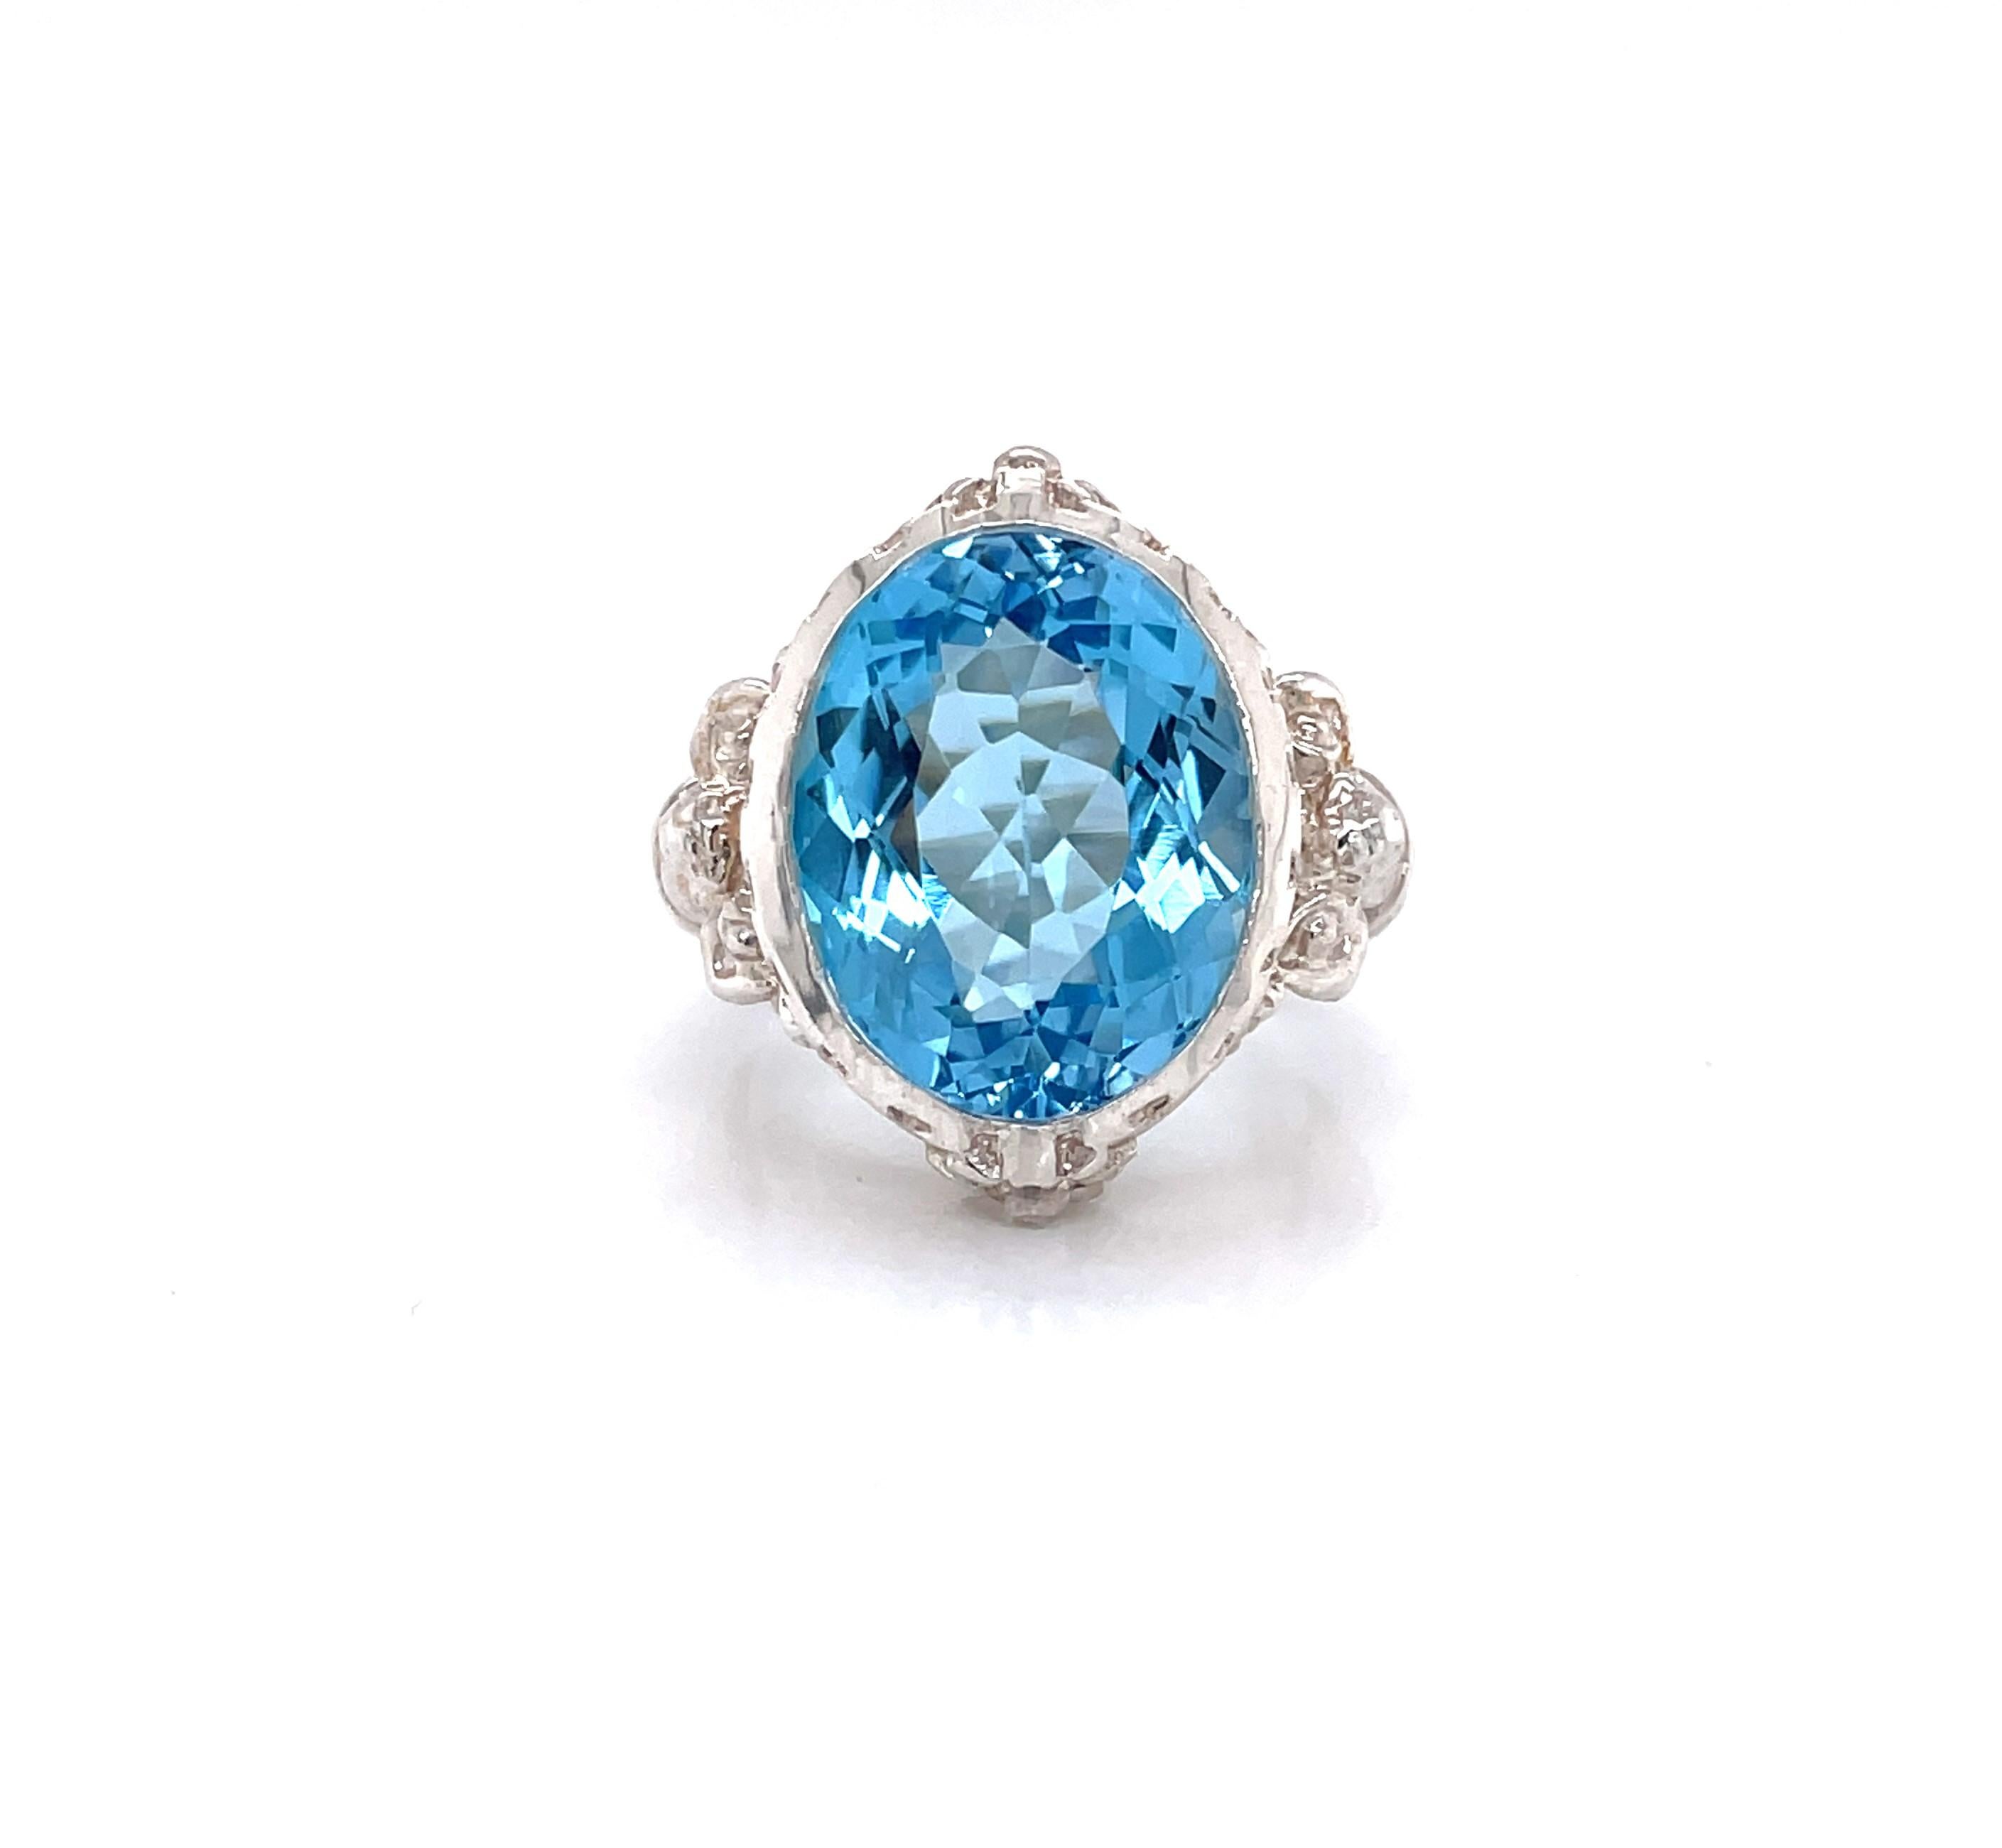 A stunning 14.5 carat oval faceted vivid blue topaz is the star of the show in this unique and ornate sterling silver cocktail ring. This is the prototype piece made in silver for an original ring design commissioned by world famous actress